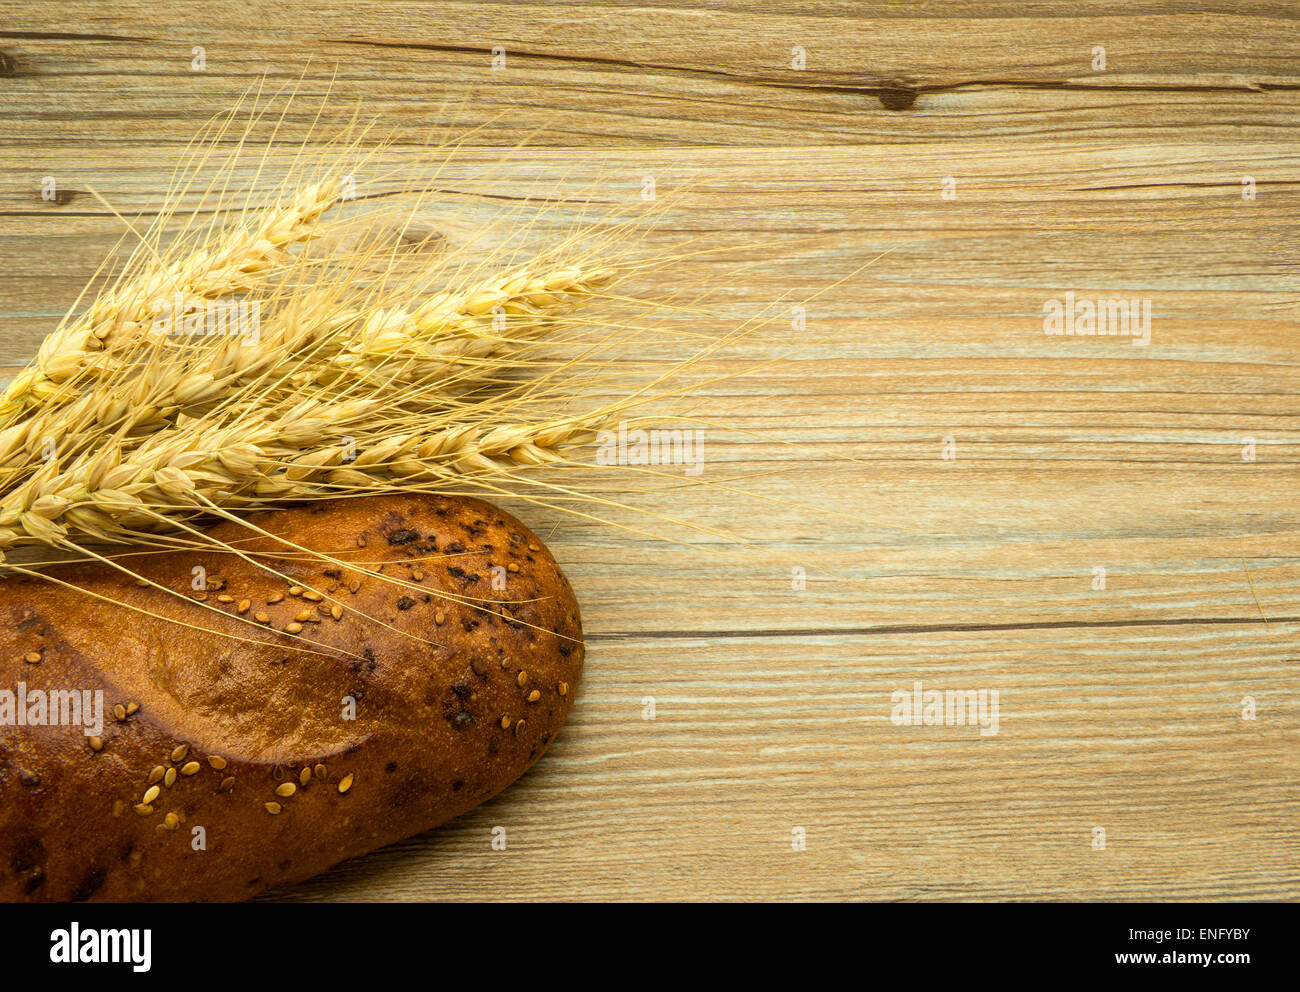 Bread with sesame seeds and ears on a wooden background. Stock Photo